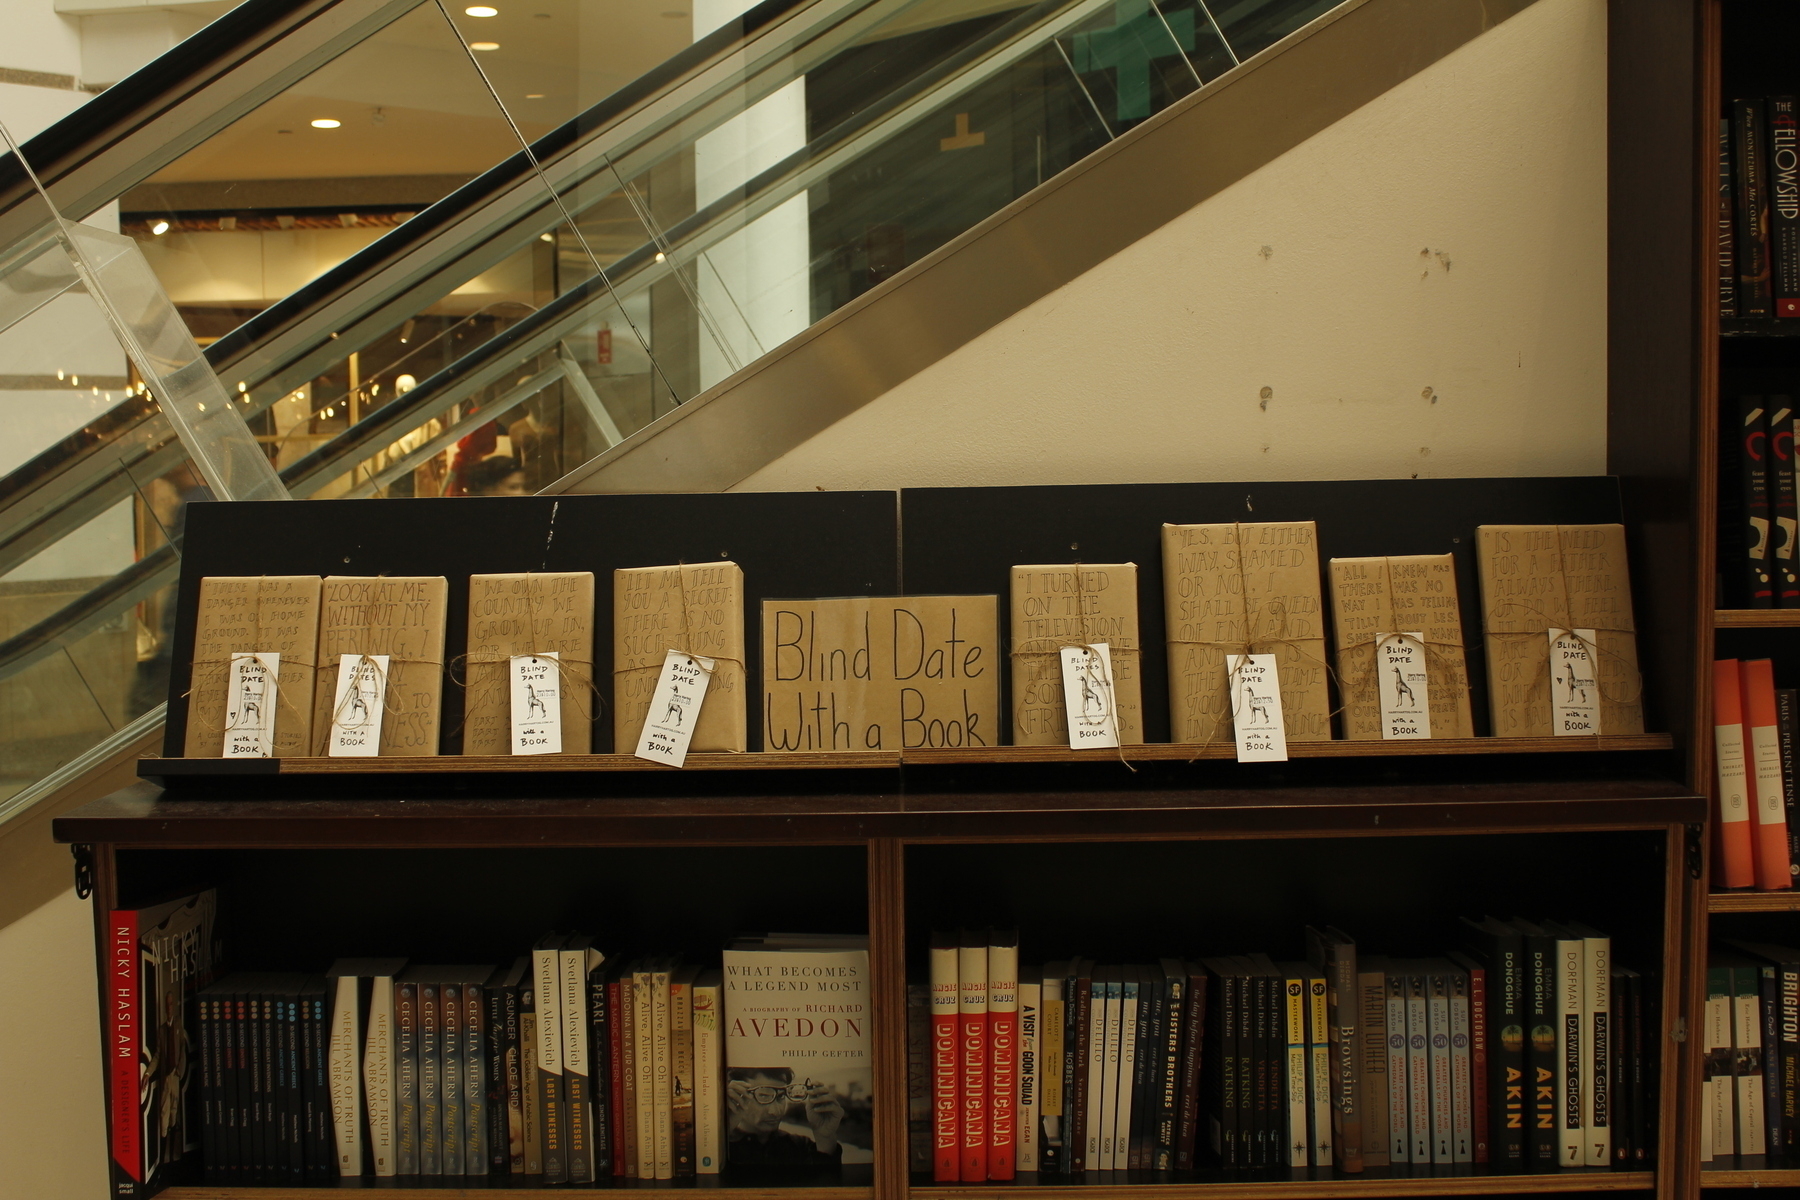 Two shelves of a book display against an escalator. A sign in the middle of the top shelf says ‘Blind Date with a Book’. On either side, facing out, are books wrapped in brown paper and tied with string, with a passage from each book written on the outside.